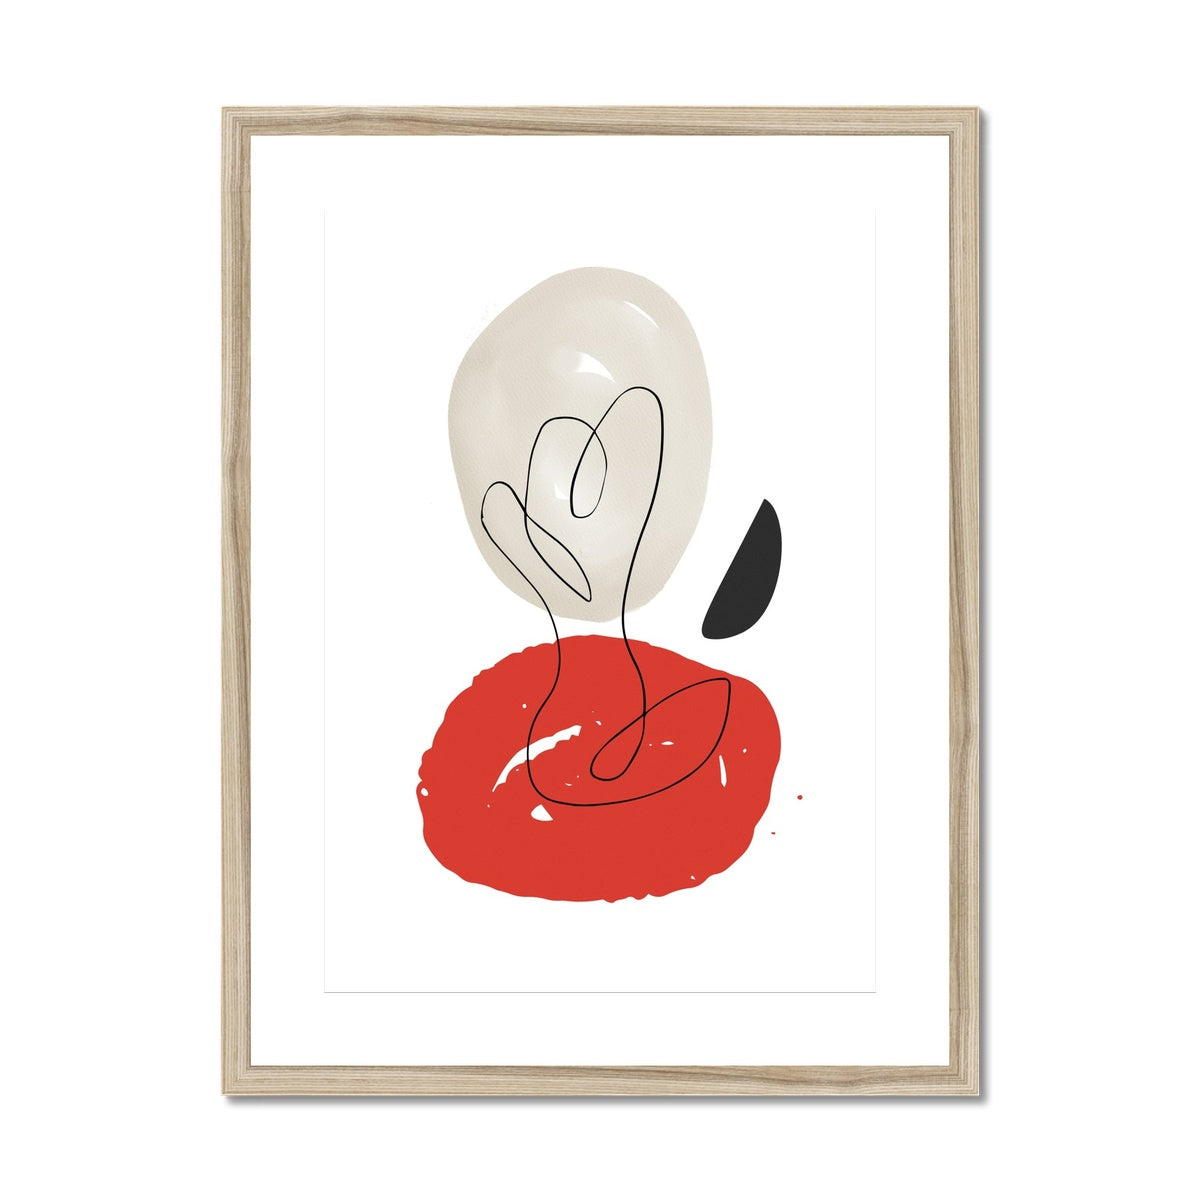 Soft Abstract Shapes Red & Beige Framed & Mounted Print